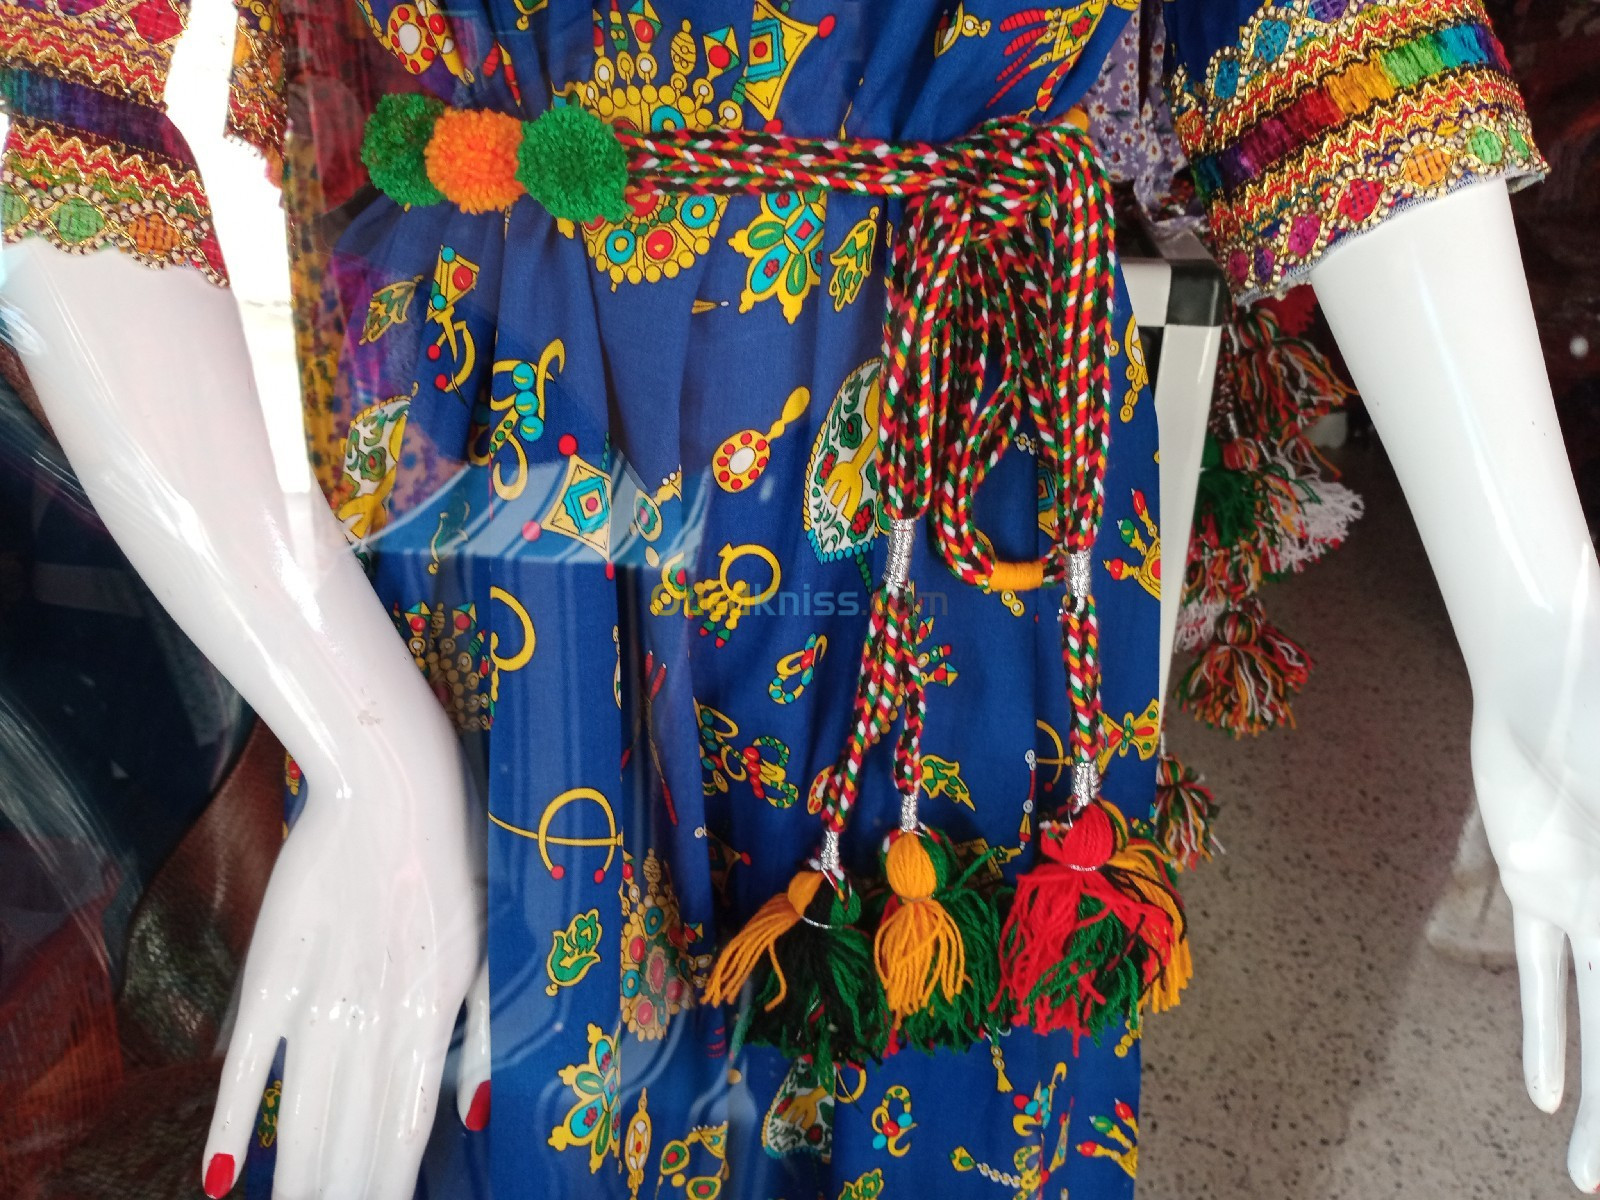 Robe kabyle traditionnelle 